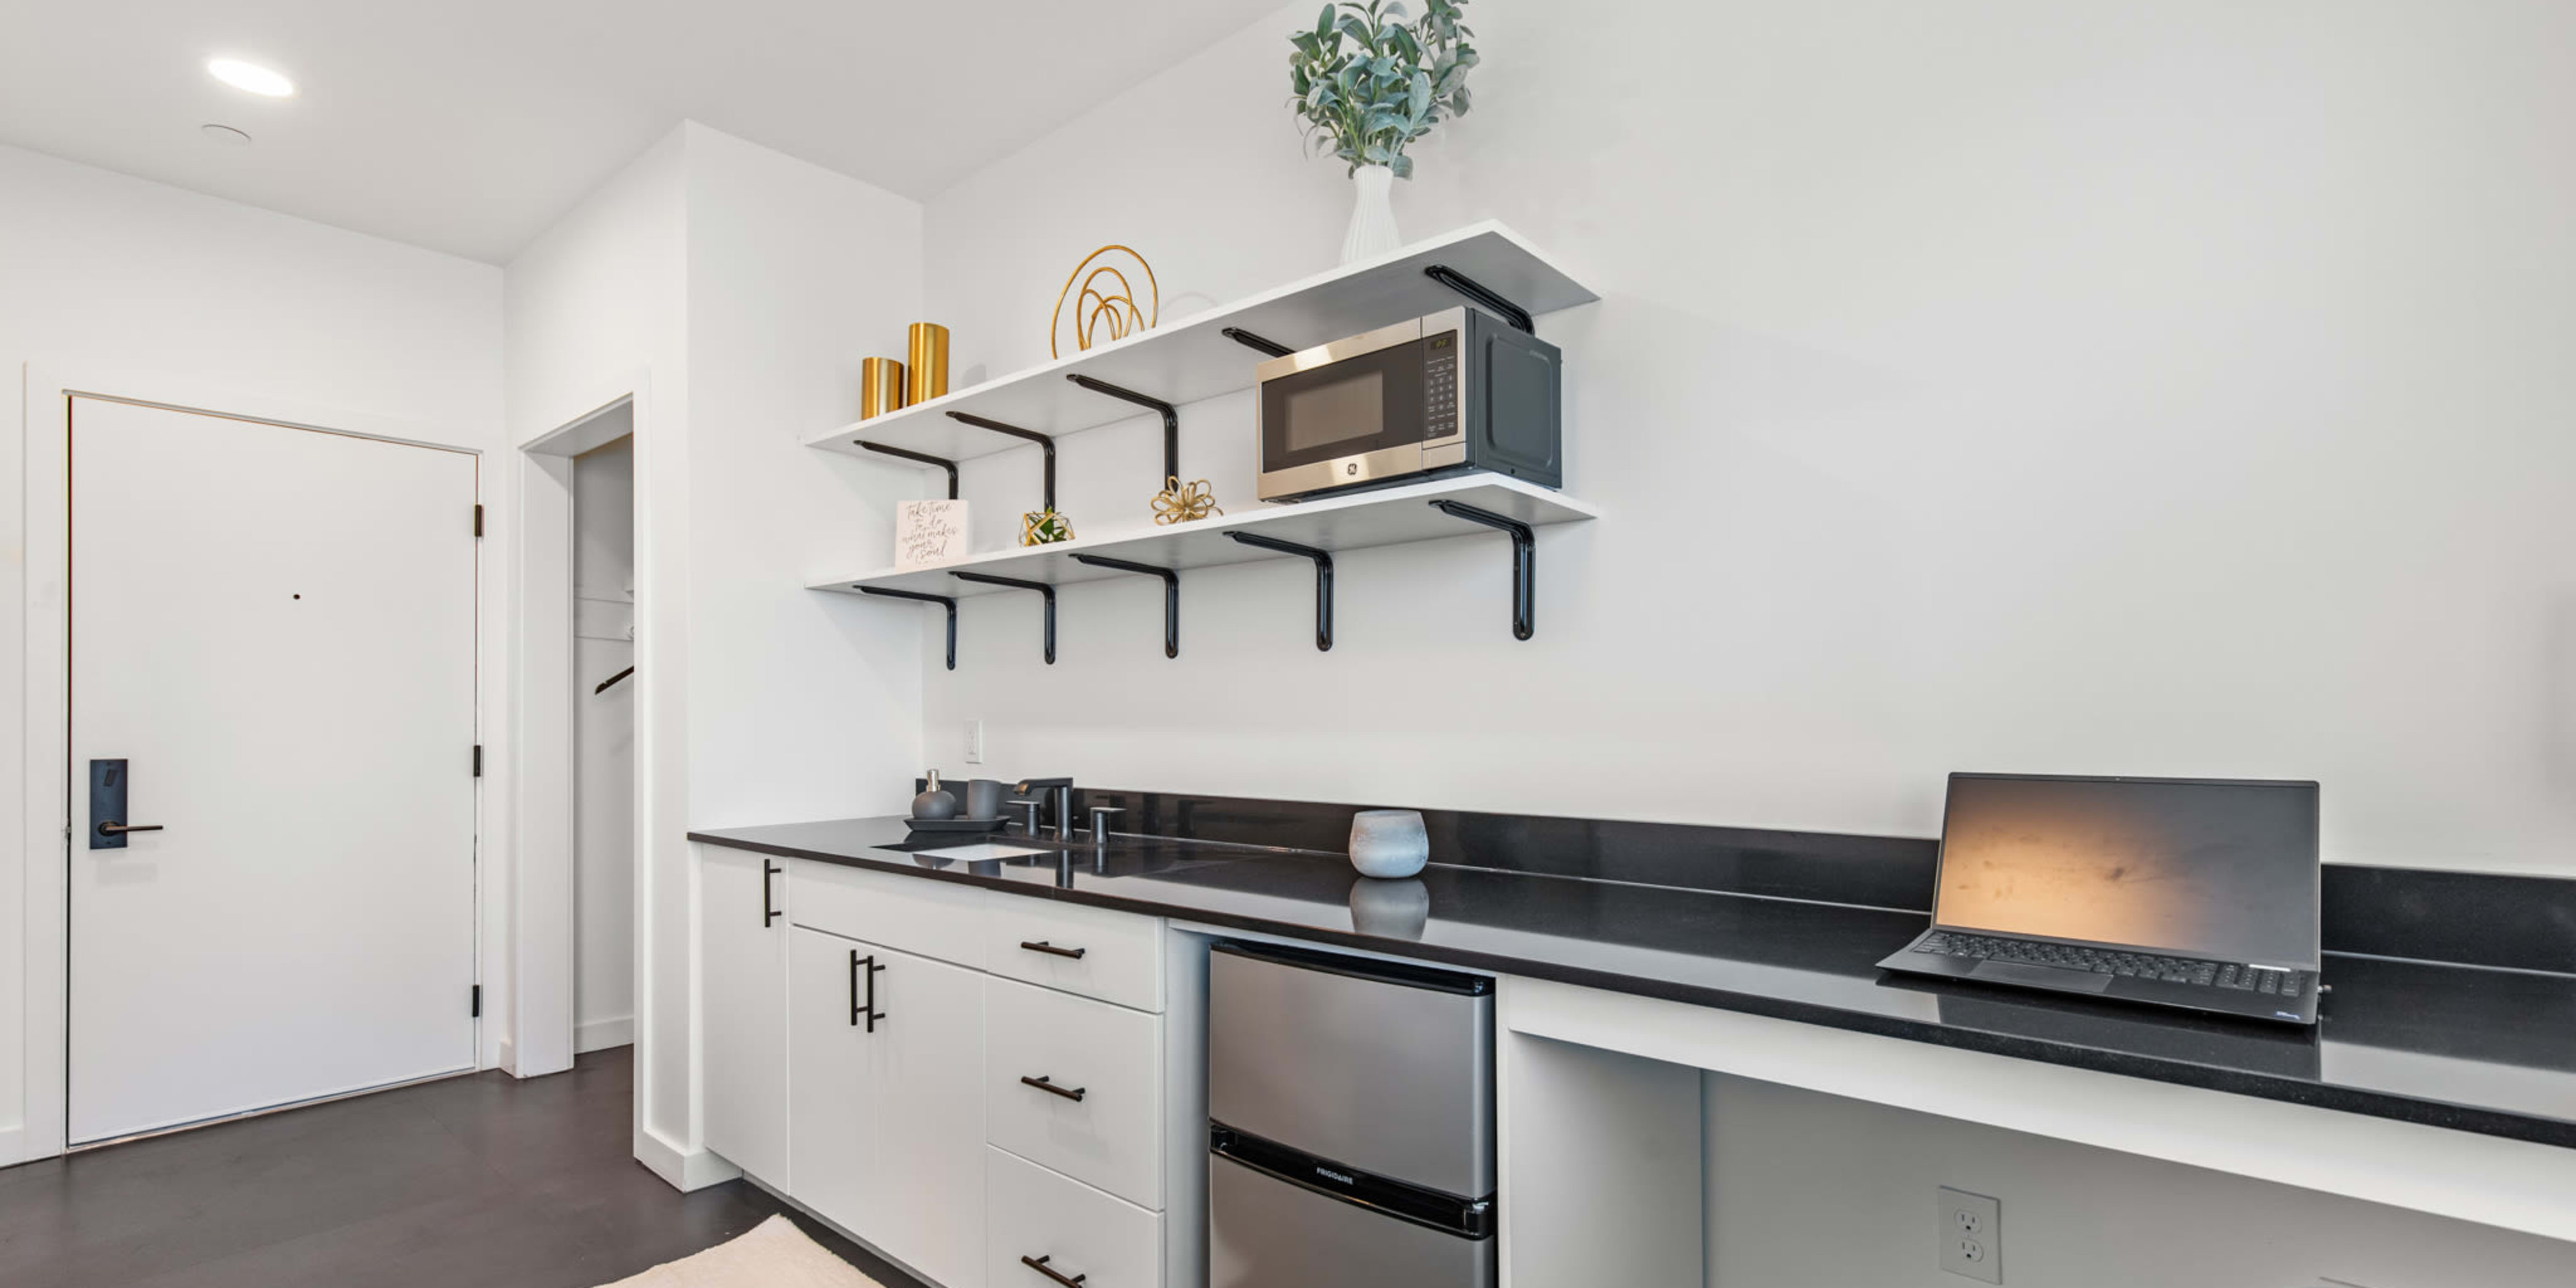 Studio apartment kitchen and working desk at Rutledge Flats | Apartments in Nashville, TN